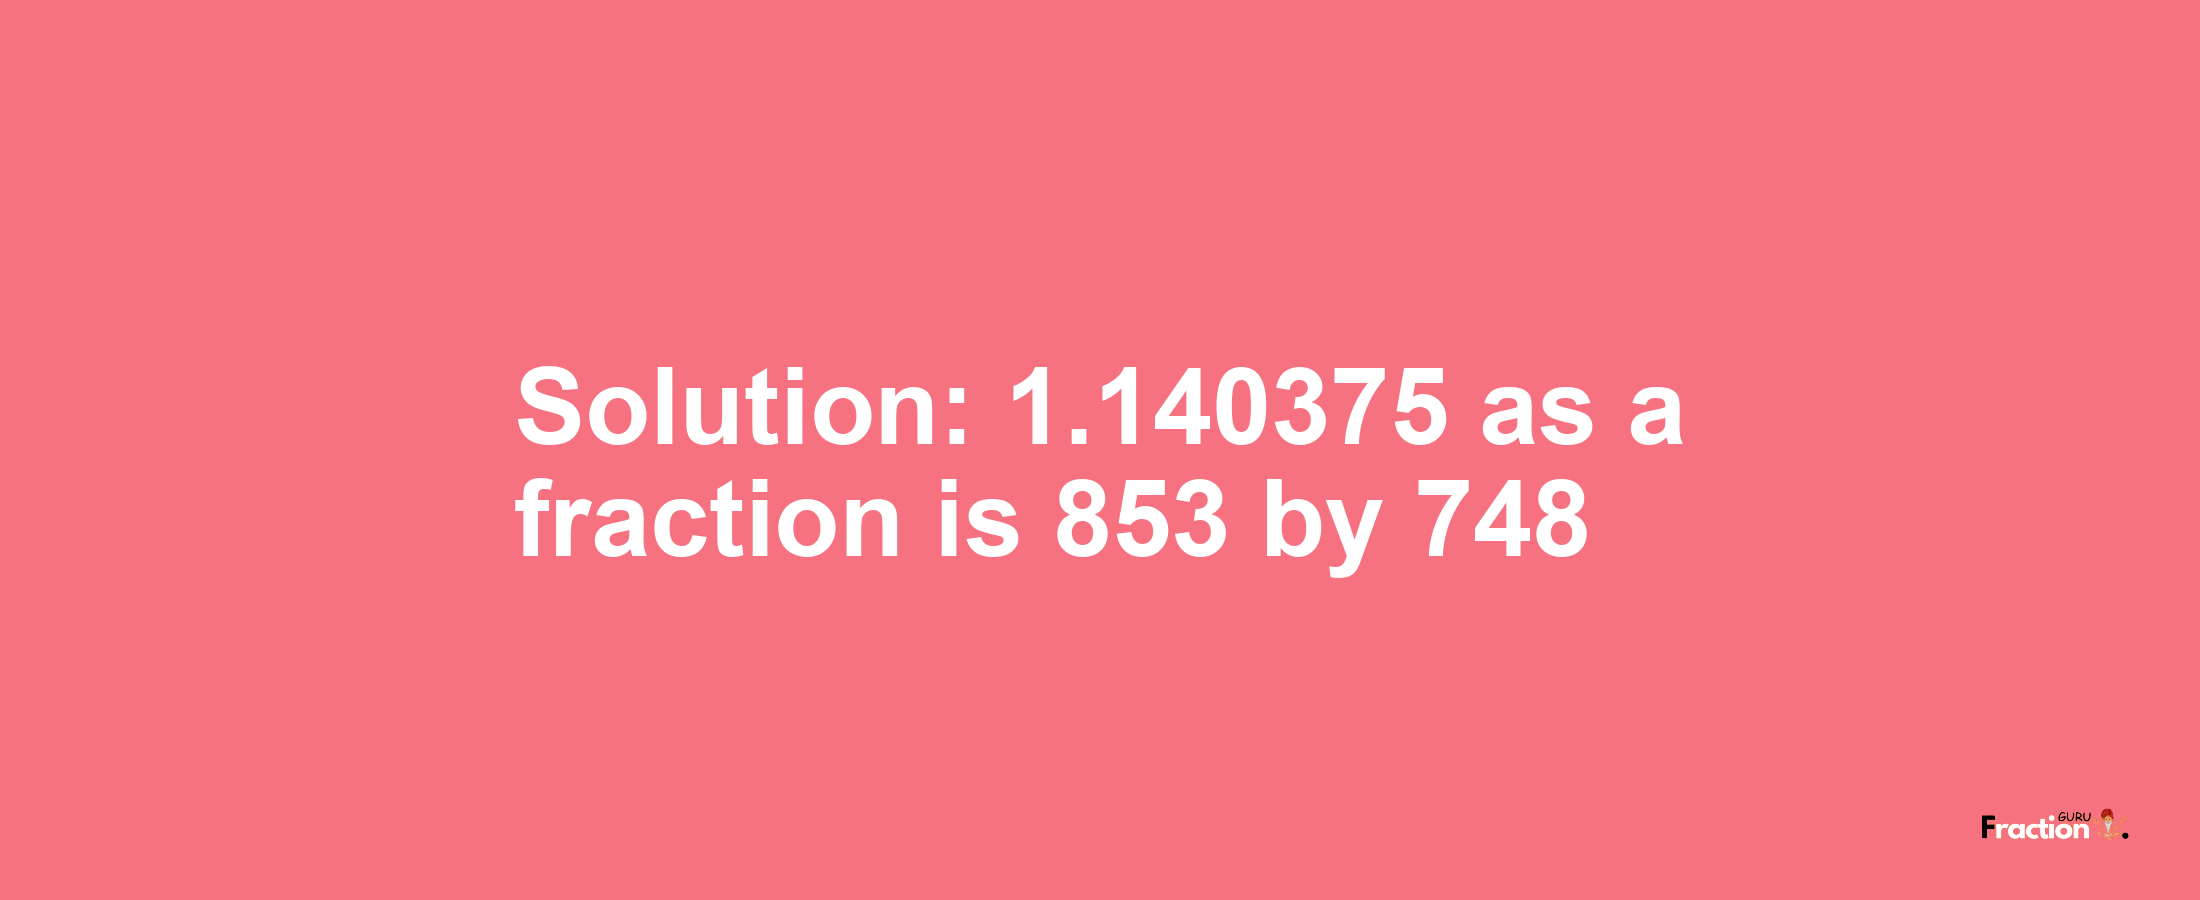 Solution:1.140375 as a fraction is 853/748